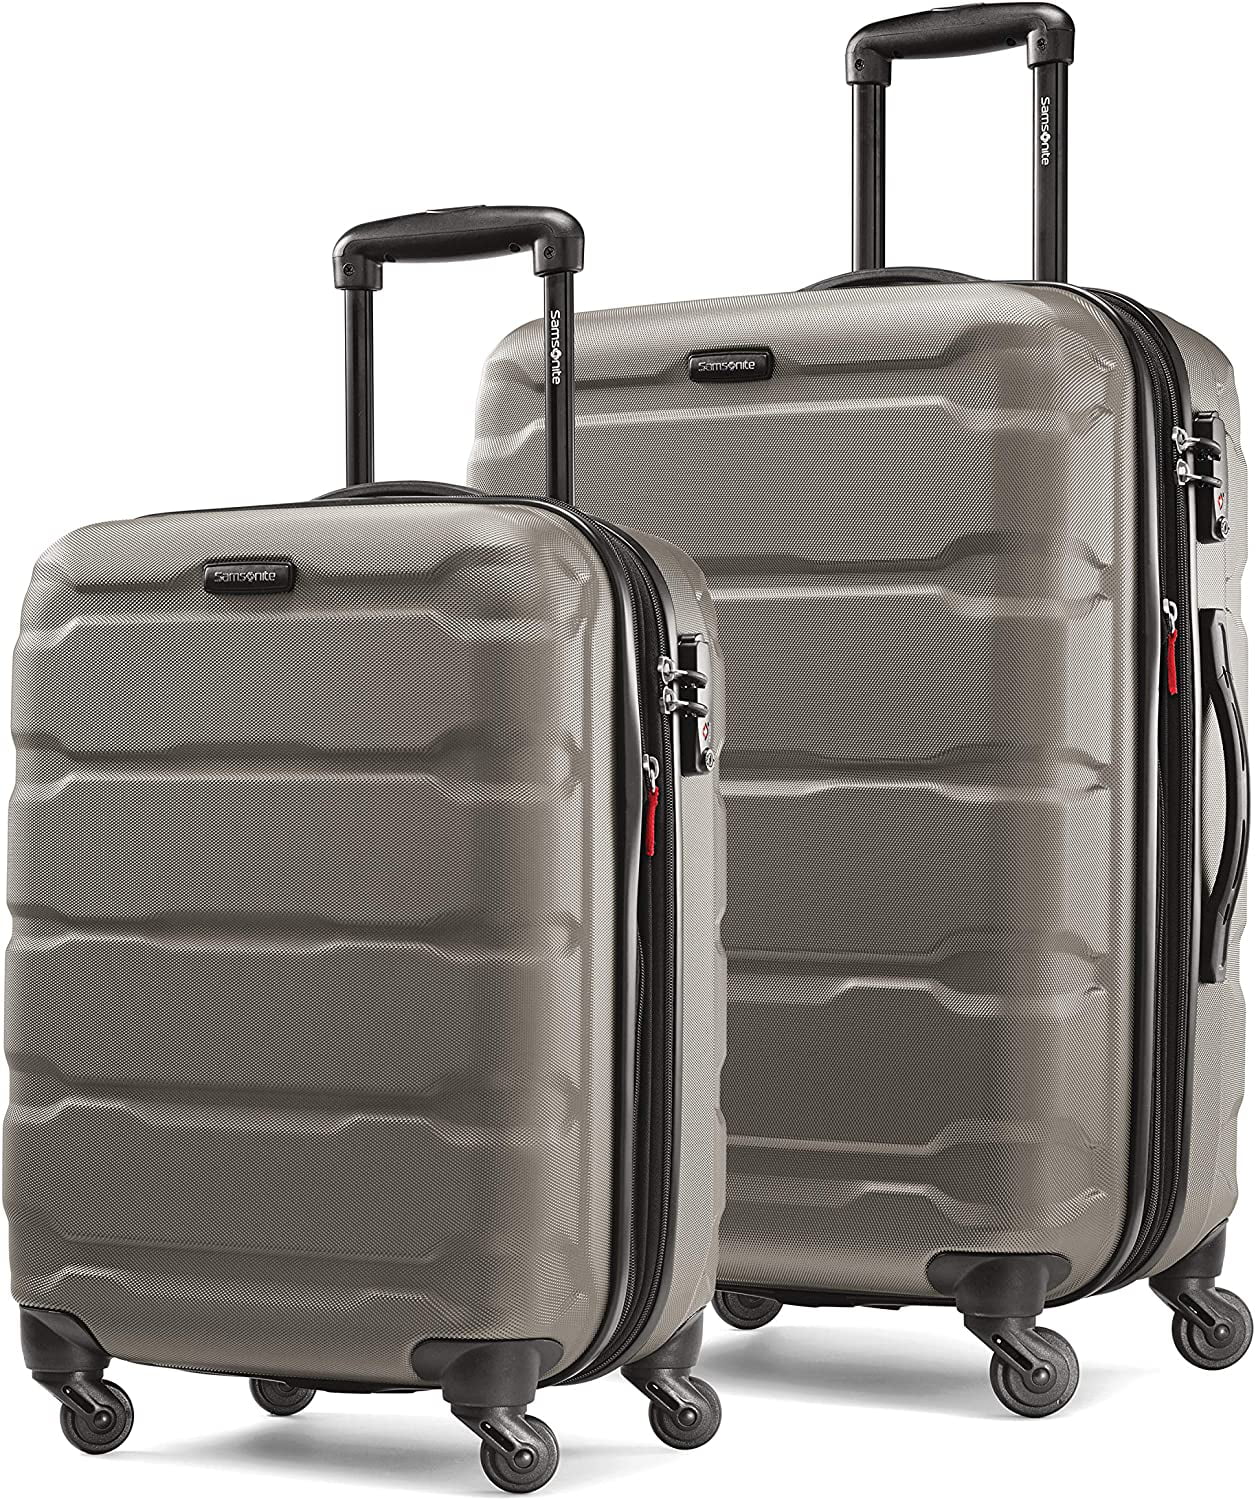 Luggage Sets 2 Piece Hard Shell with Spinner Wheels